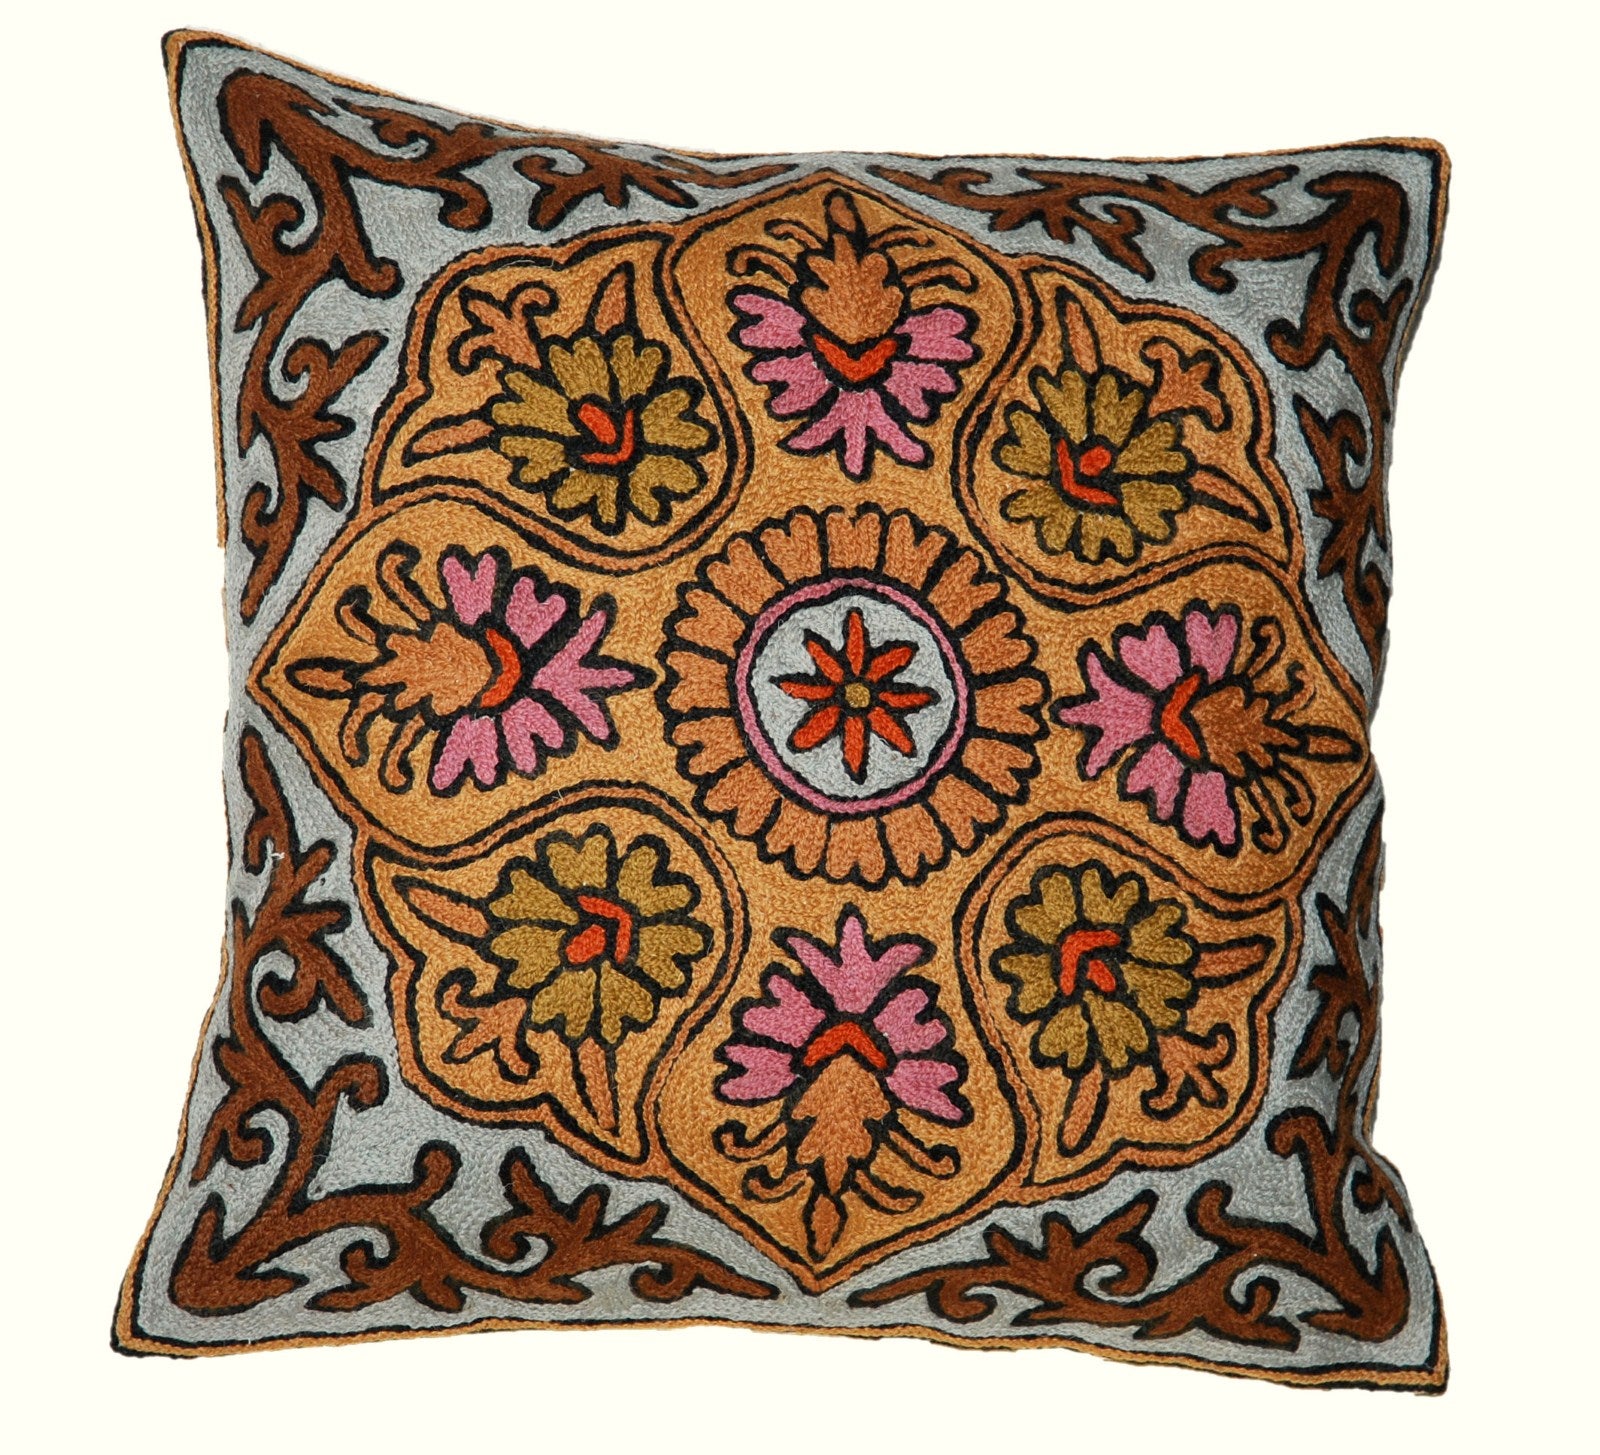 Crewel Wool Embroidered Cushion Throw Pillow Cover, Multicolor #CW1006